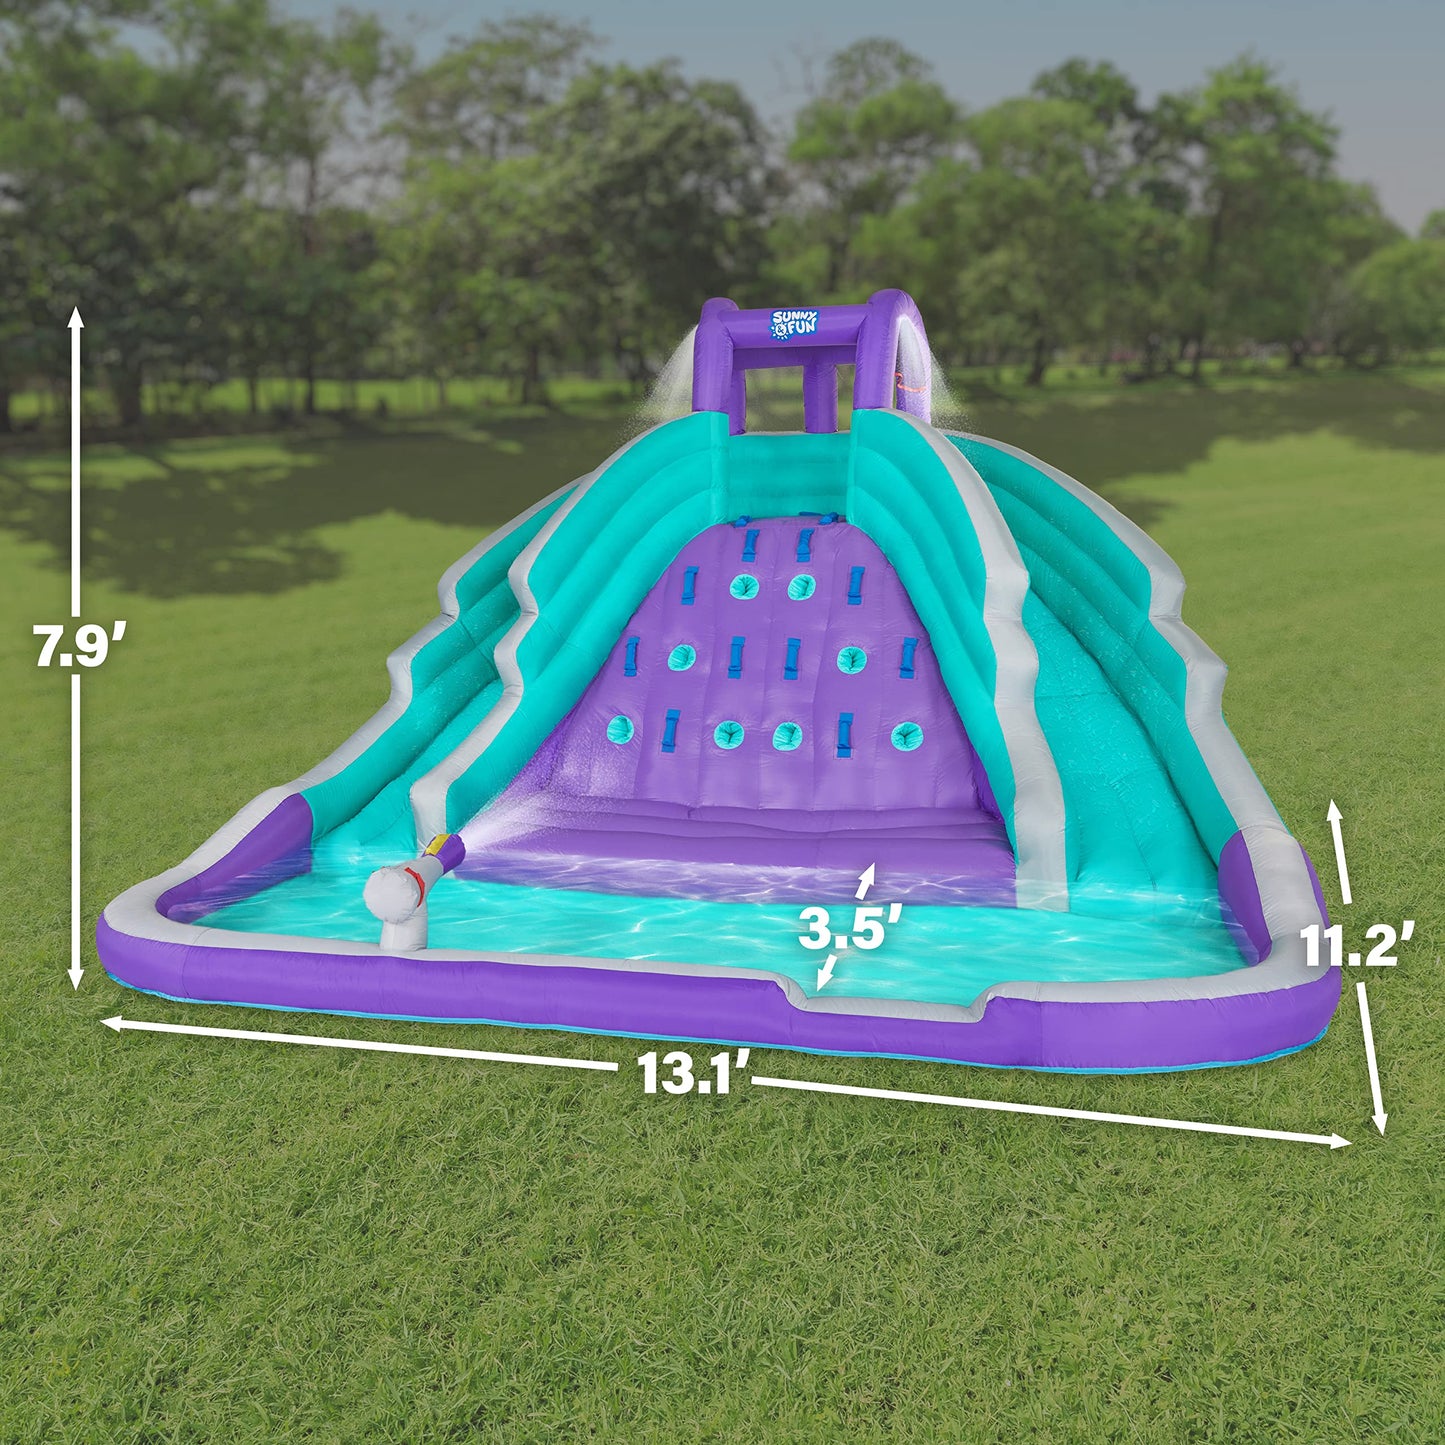 SUNNY & FUN Ultra Climber Inflatable Water Slide Park – Heavy-Duty for Outdoor Fun - Climbing Wall, Two Slides & Splash Pool – Easy to Set Up & Inflate with Included Air Pump & Carrying Case Purple